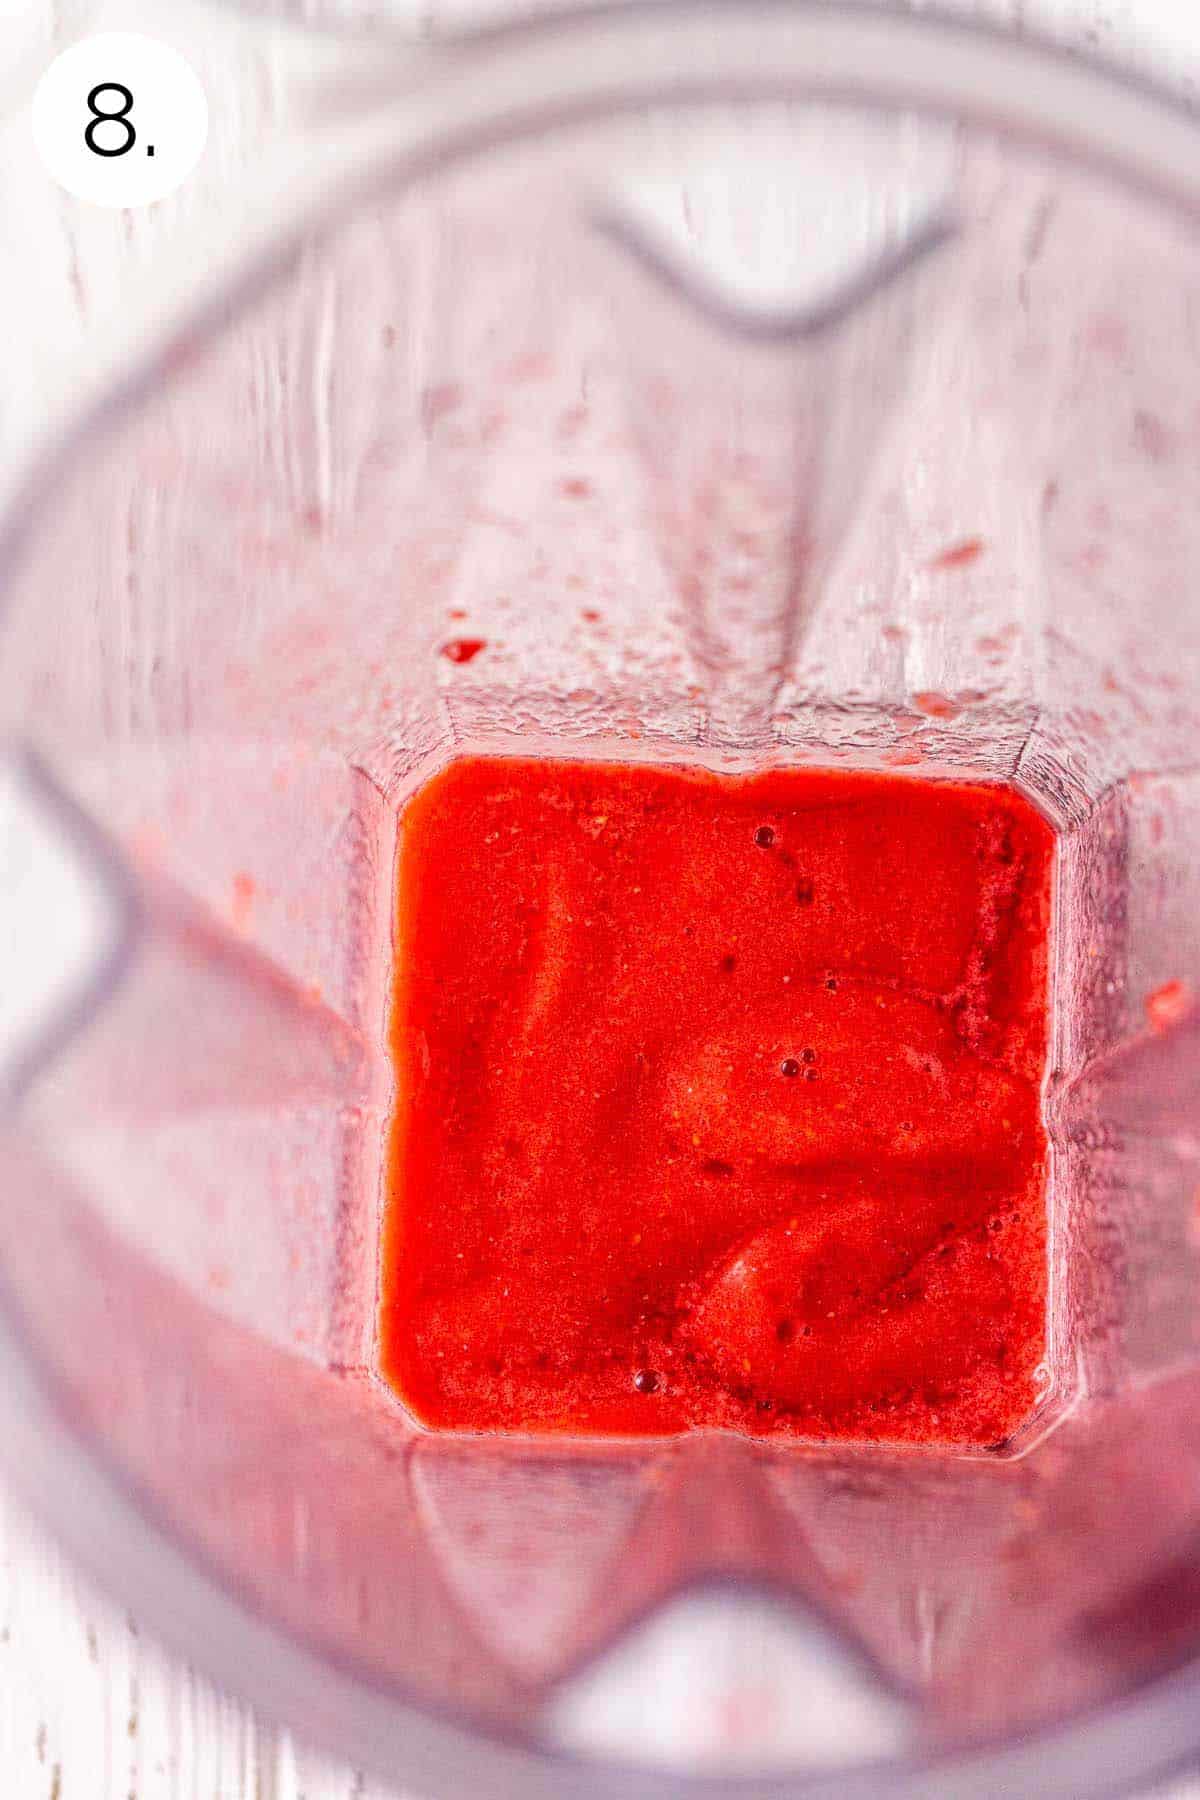 The frozen daiquiri in the blender on a white wooden surface after the ingredients have been processed until smooth.